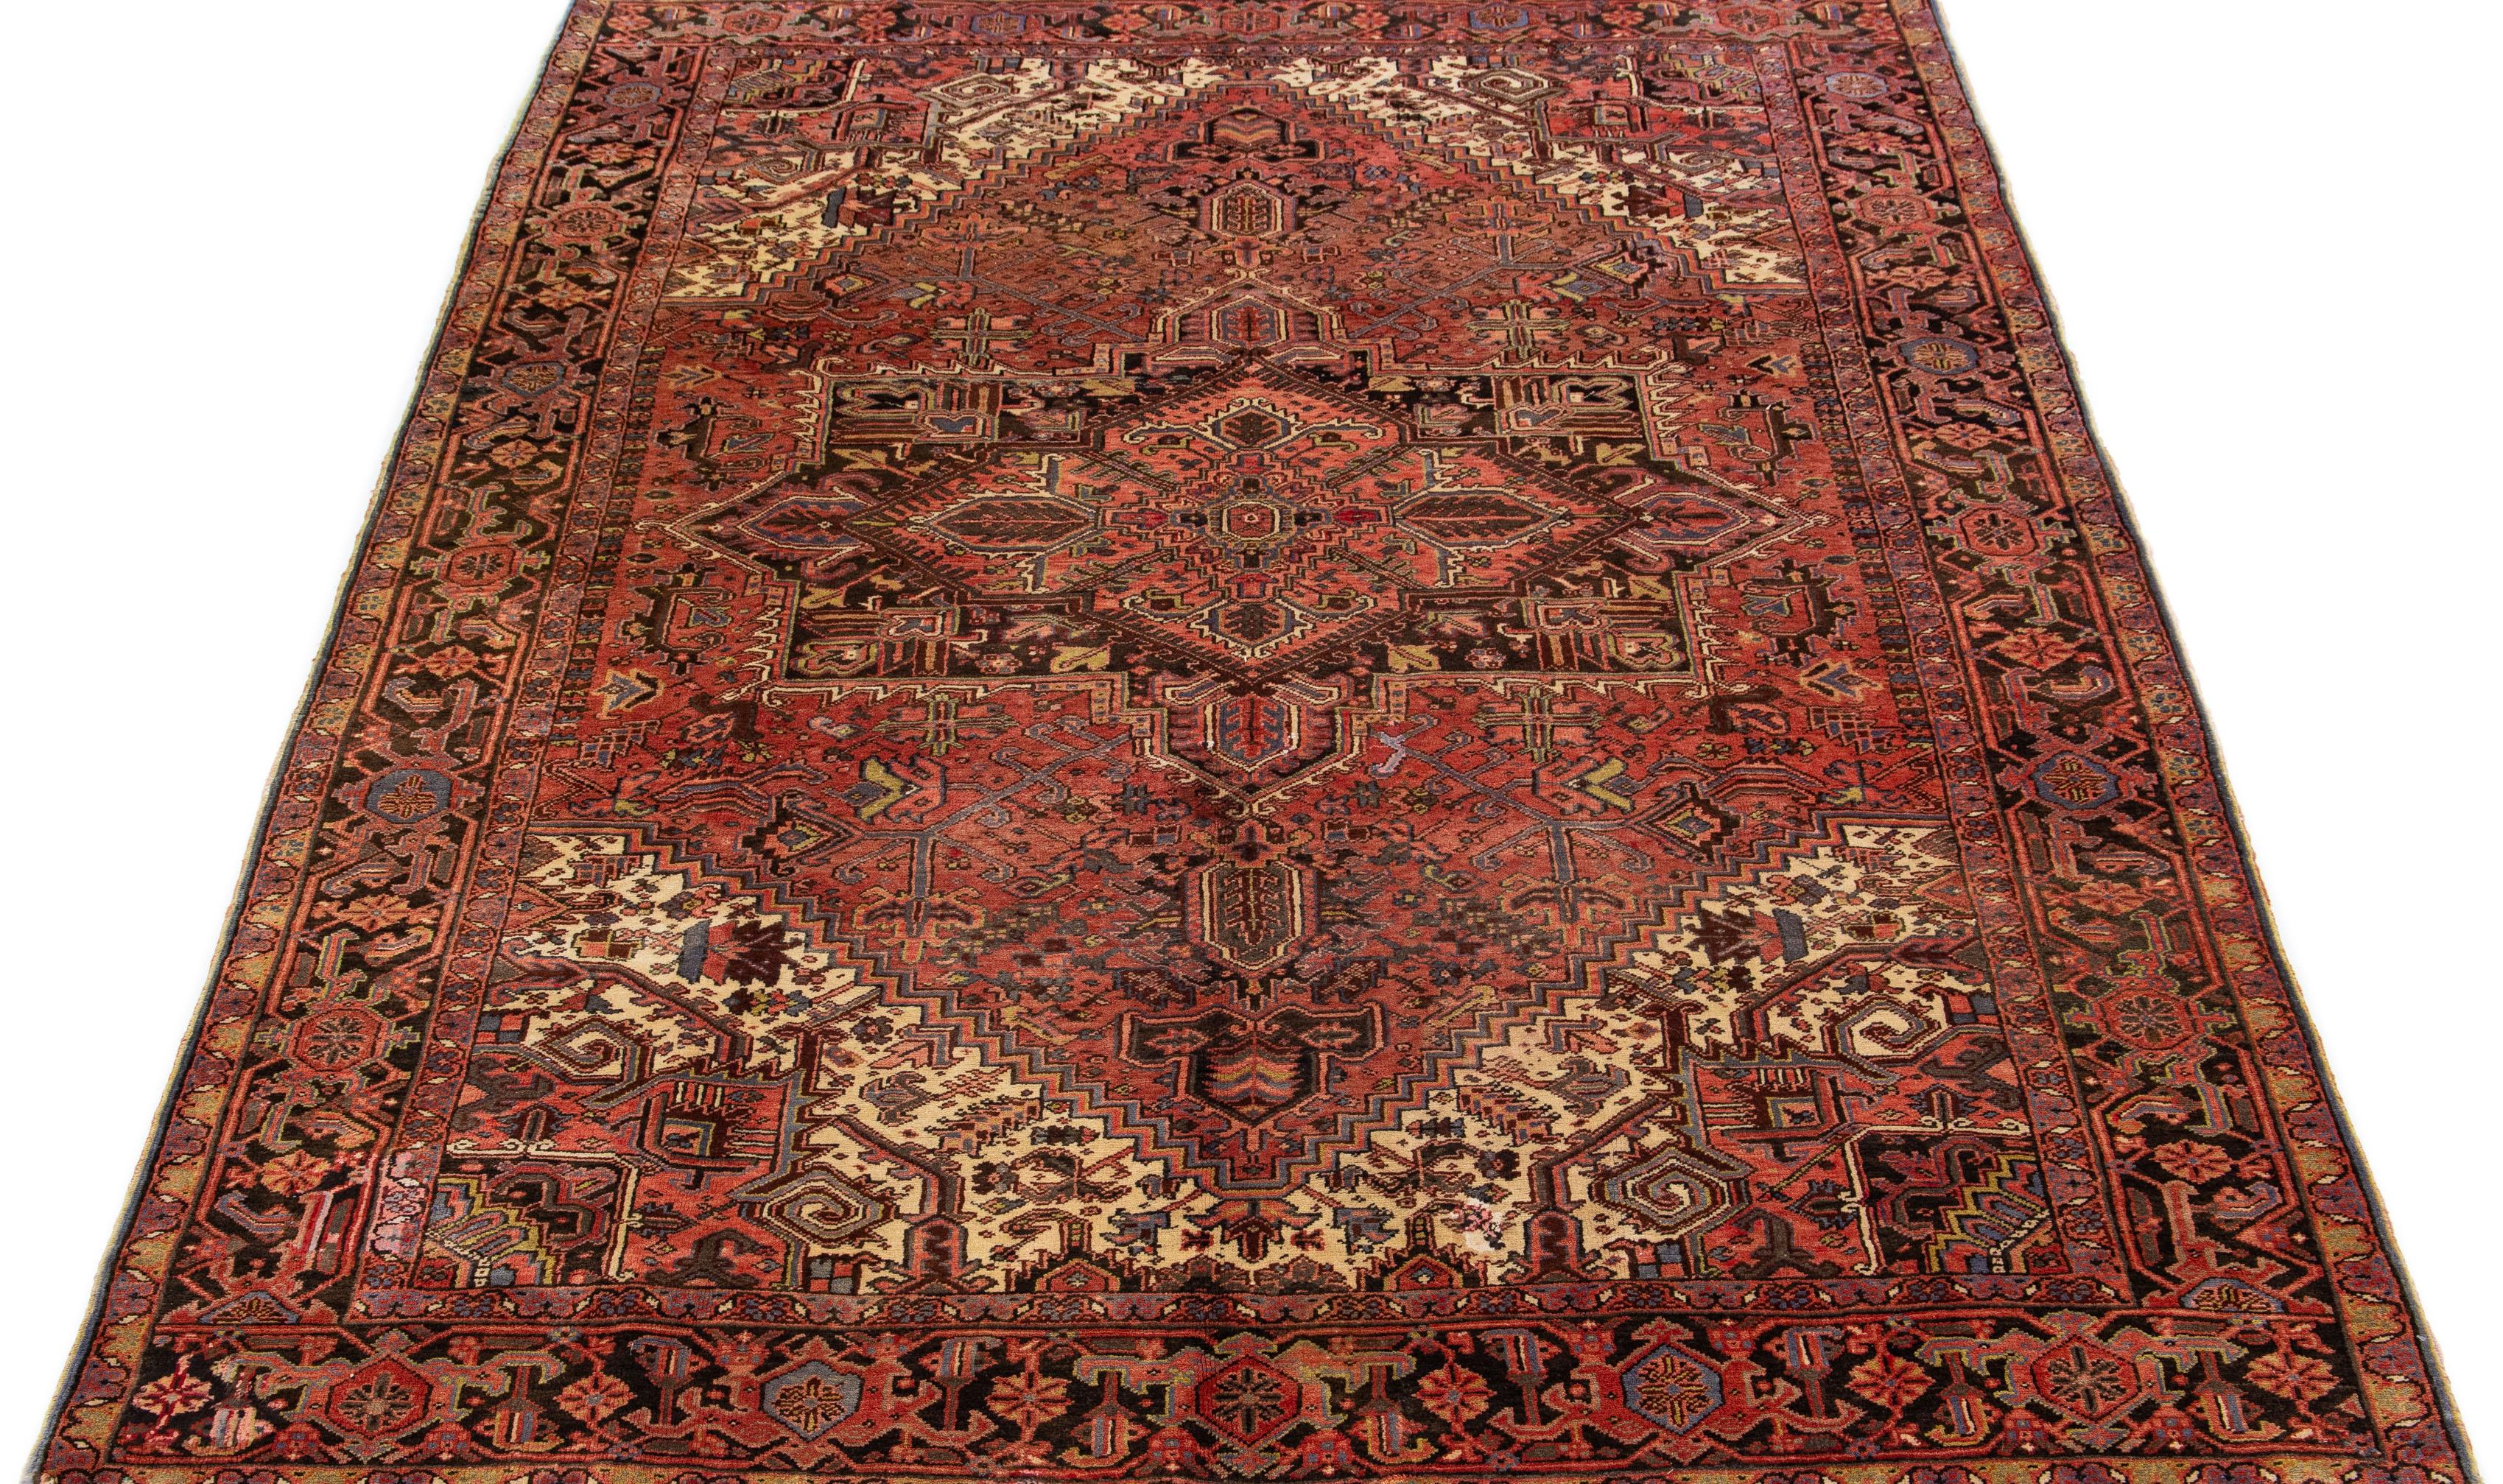 Beautiful vintage Heriz hand knotted wool rug with a red-rust color field. This Persian rug has multi-color accents in a gorgeous all-over geometric floral medallion design.

This rug measures 8'1